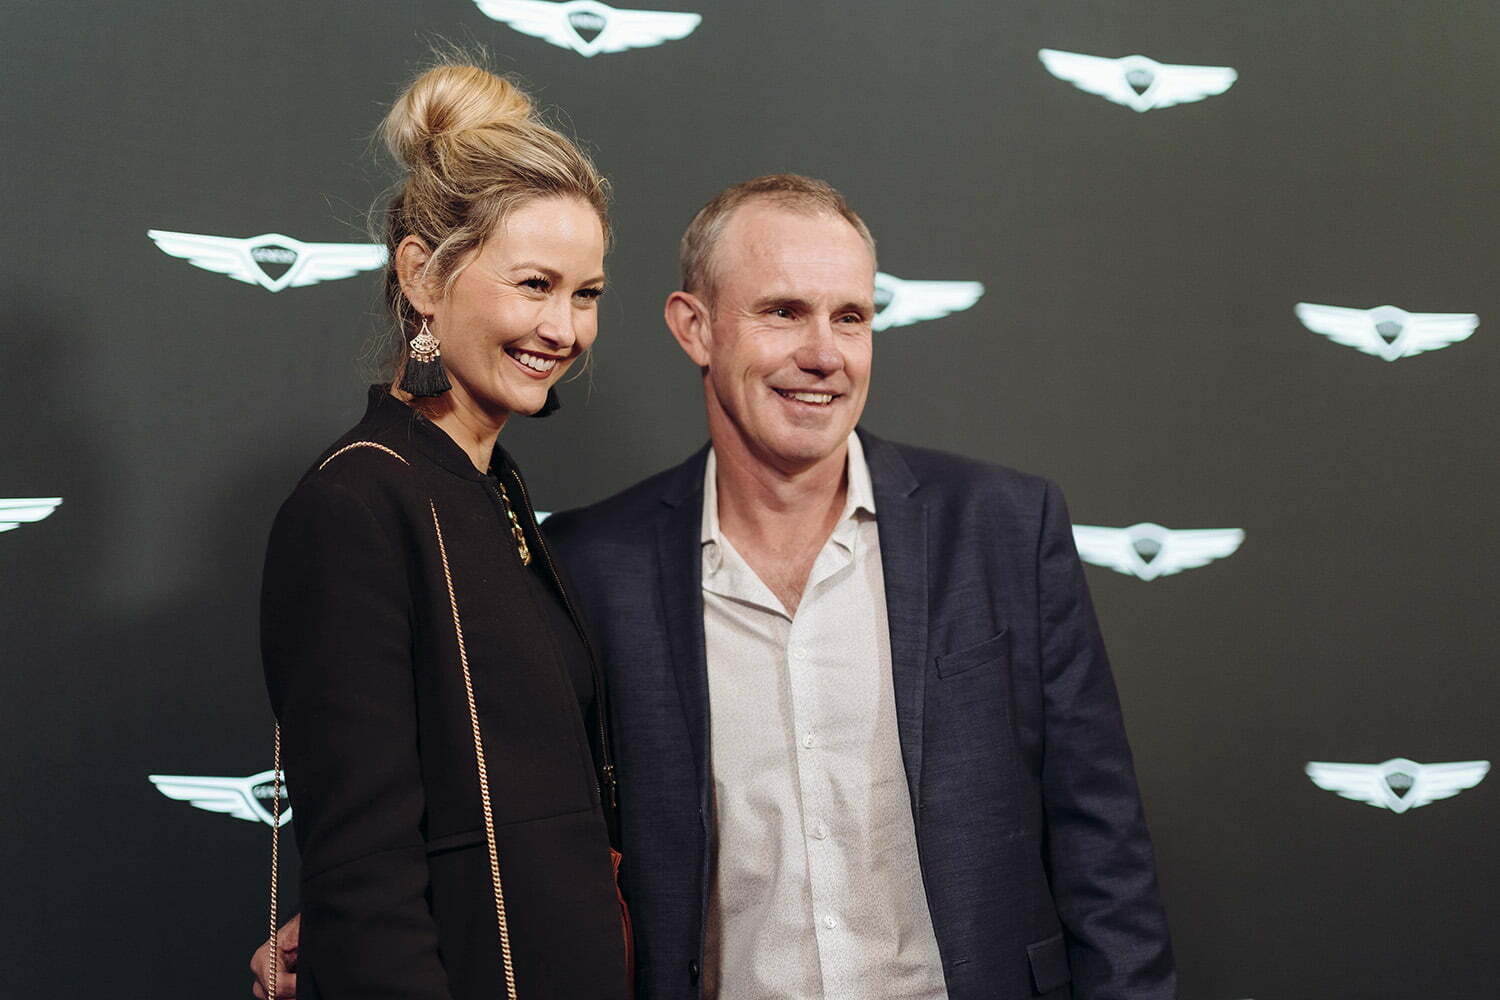 Bree Laughlin and Paul Gow - Genesis event at the Museum of Contemporary Art Australia